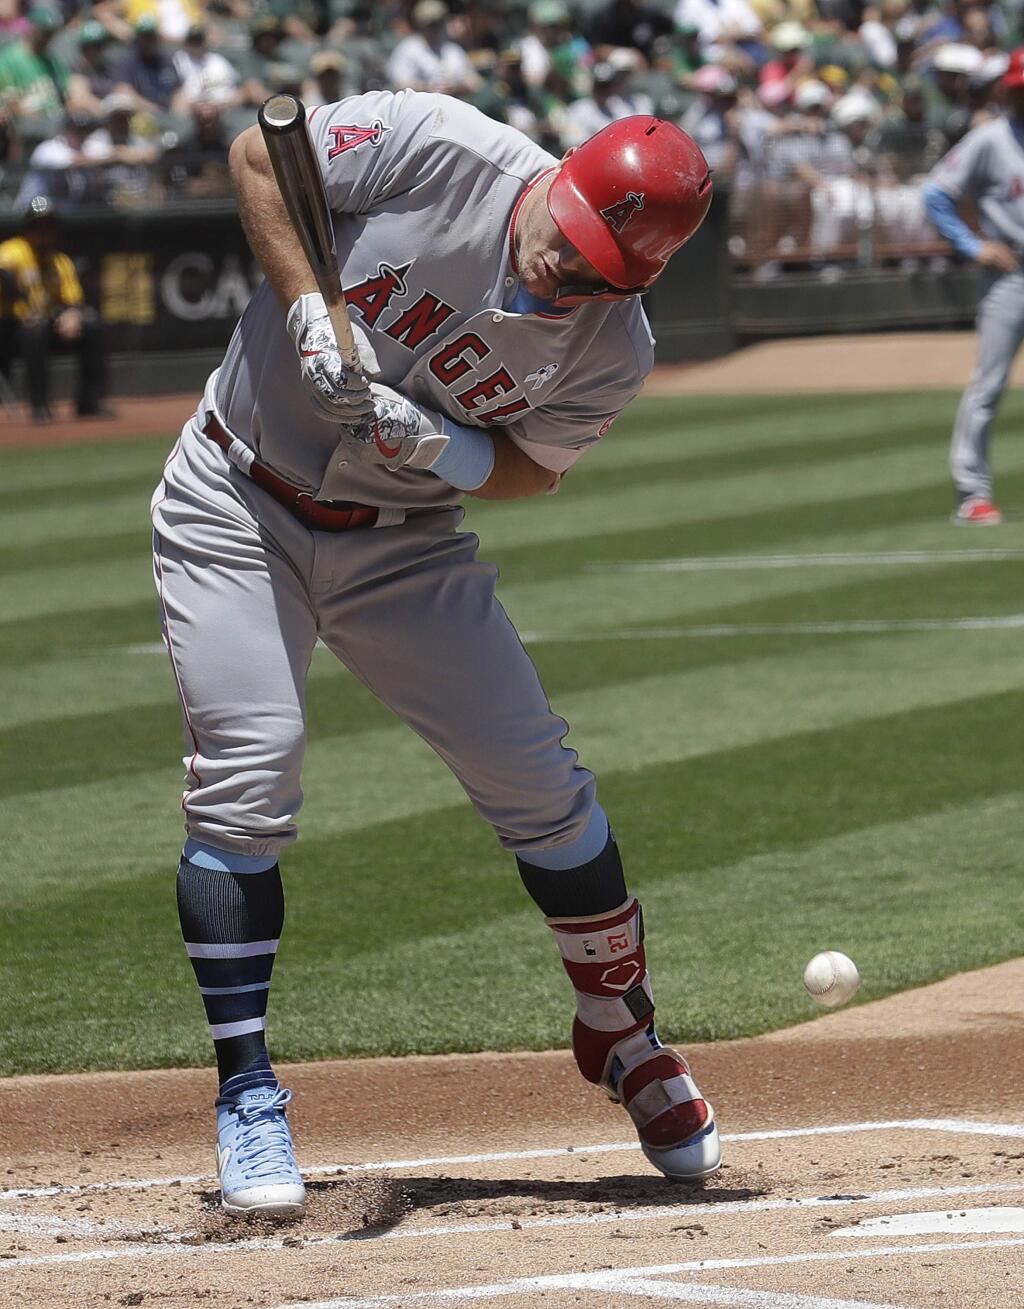 Los Angeles Angels' Mike Trout is hit by a throw from Oakland Athletics pitcher Daniel Mengden during the first inning of a baseball game in Oakland, Calif., Sunday, June 17, 2018. (AP Photo/Jeff Chiu)